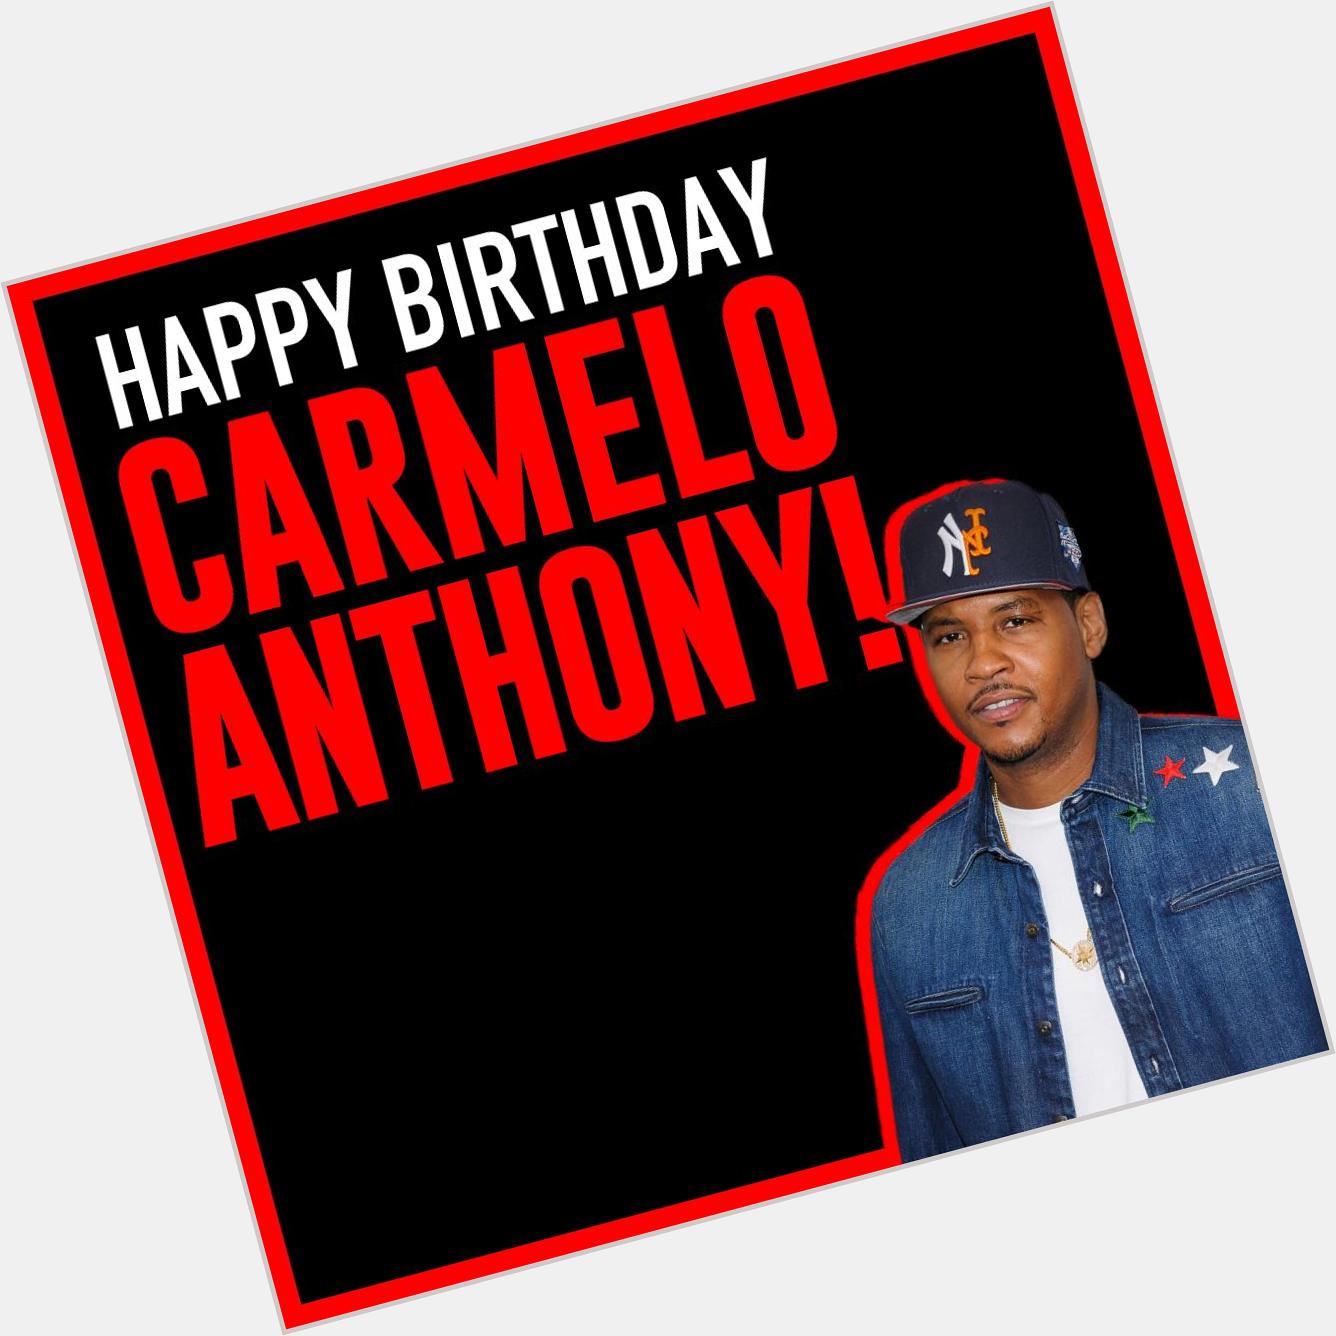 Happy Birthday to Carmelo Anthony. The baller is 35 years old today. 